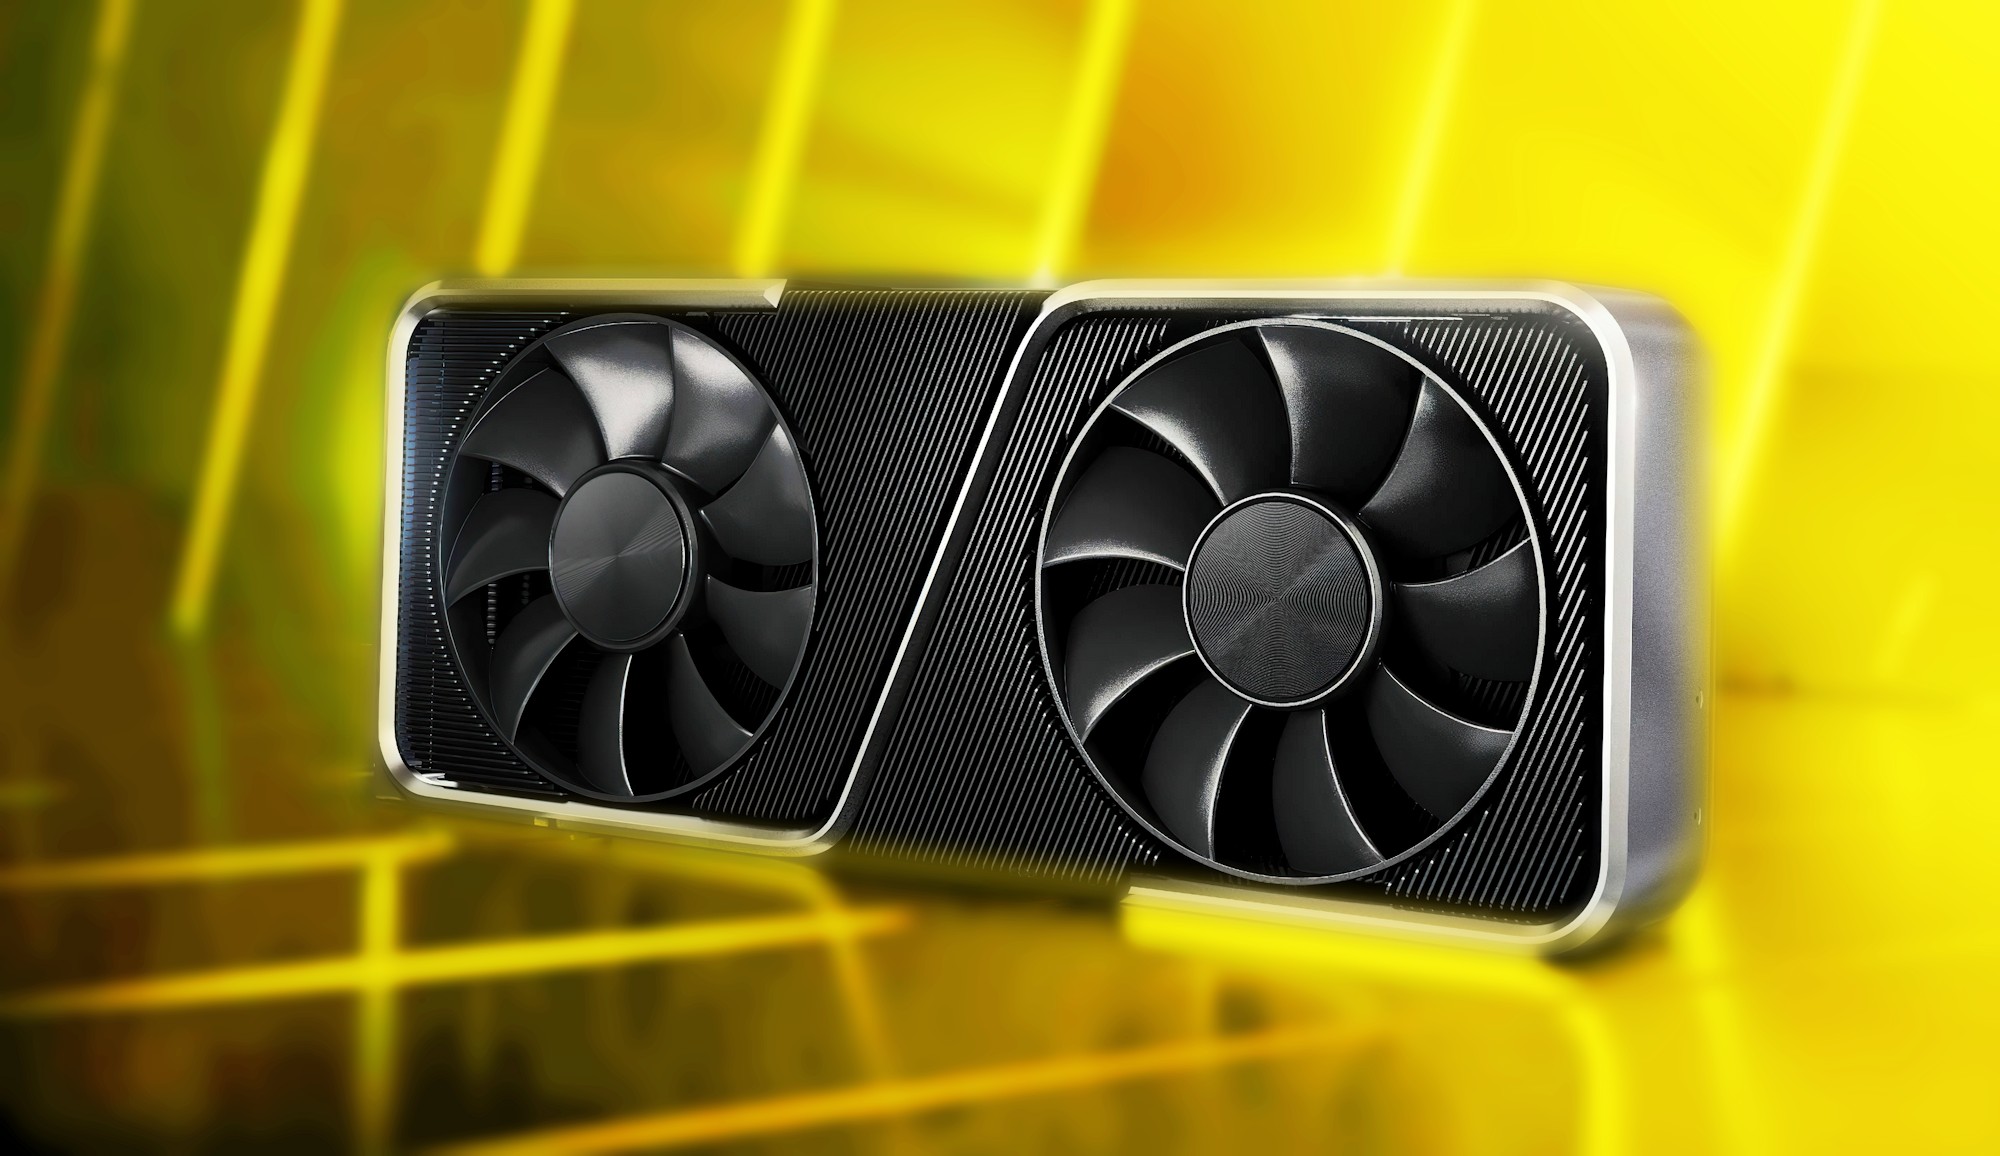 NVIDIA GeForce RTX 3060 Ti GDDR6X is at least 7% faster than GDDR6 variant in 3DMark tests